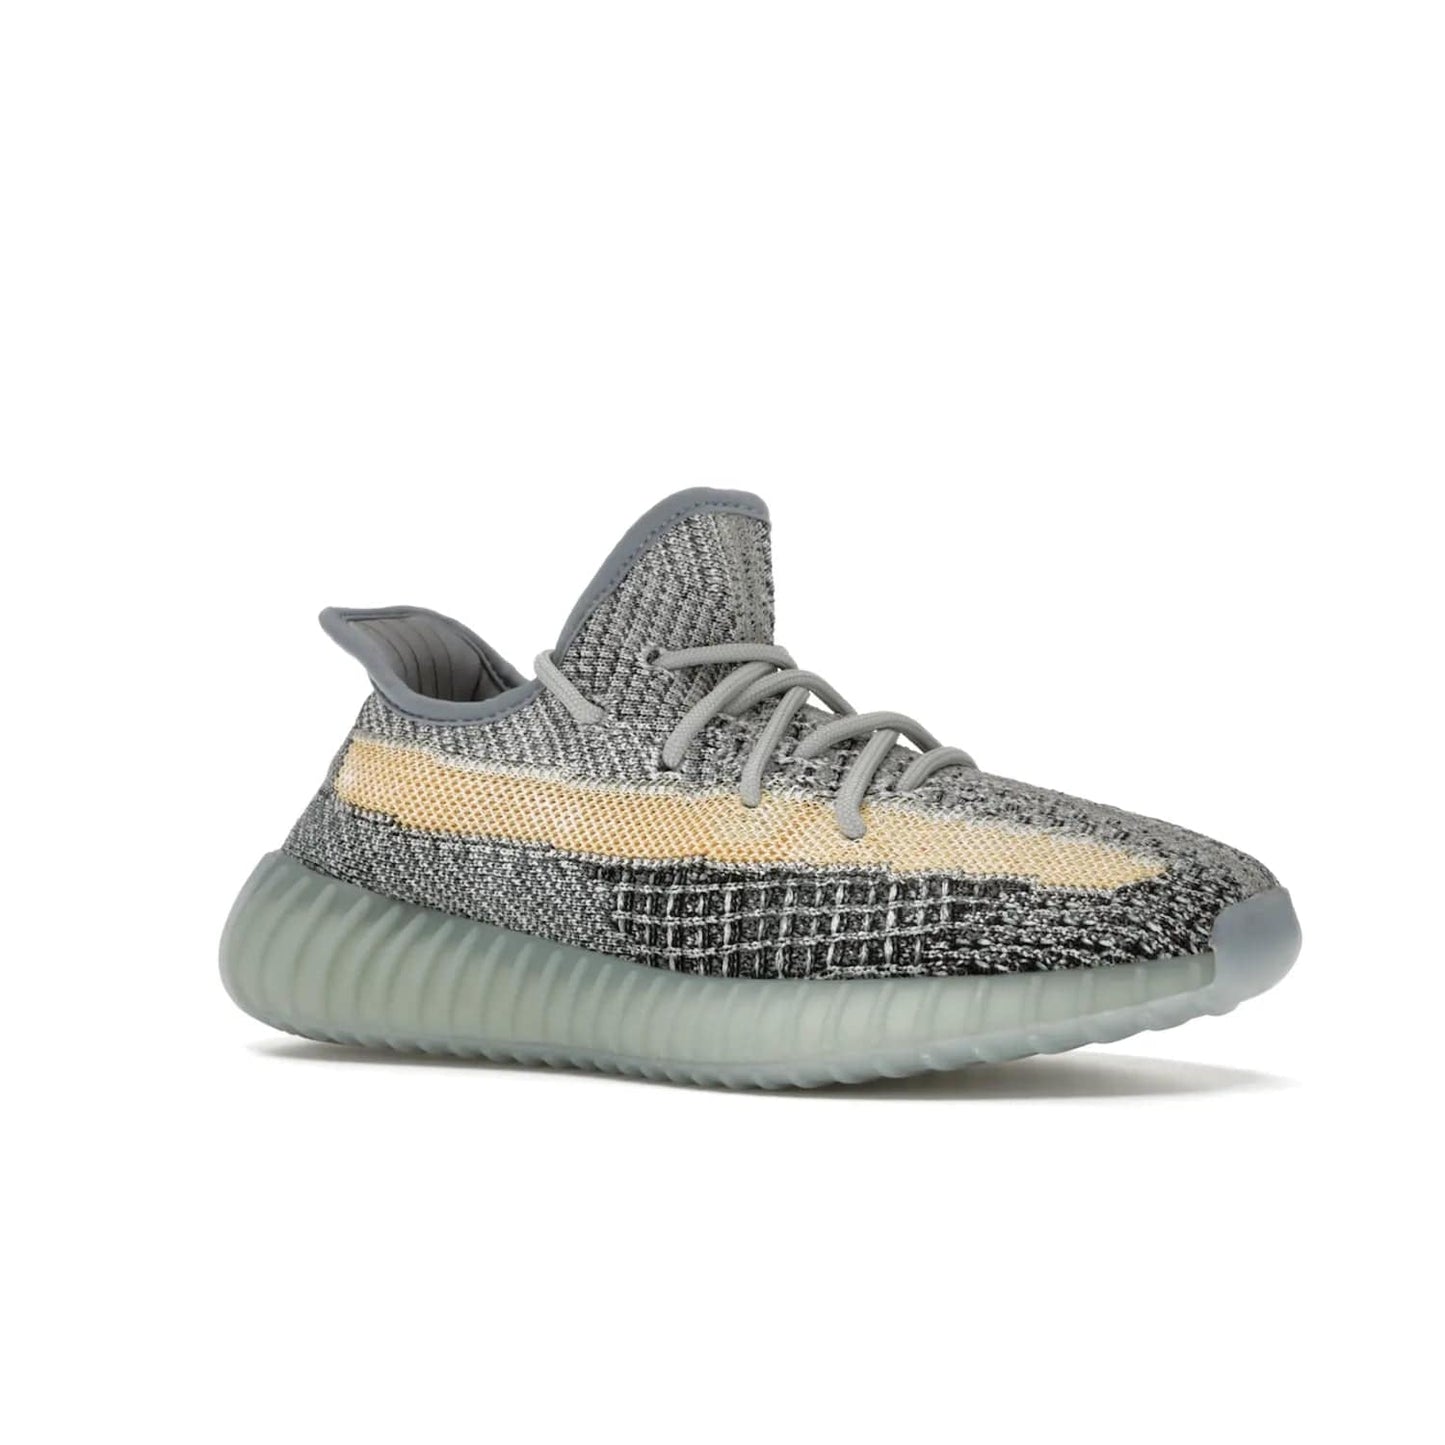 adidas Yeezy Boost 350 V2 Ash Blue - Image 4 - Only at www.BallersClubKickz.com - Must-have design made of engineered primeknit upper, comfortable sock-like upper and full-length Boost midsole, and semi-translucent rubber cage for added durability and style. The adidas Yeezy Boost 350 V2 Ash Blue blends timeless colors and comfort.